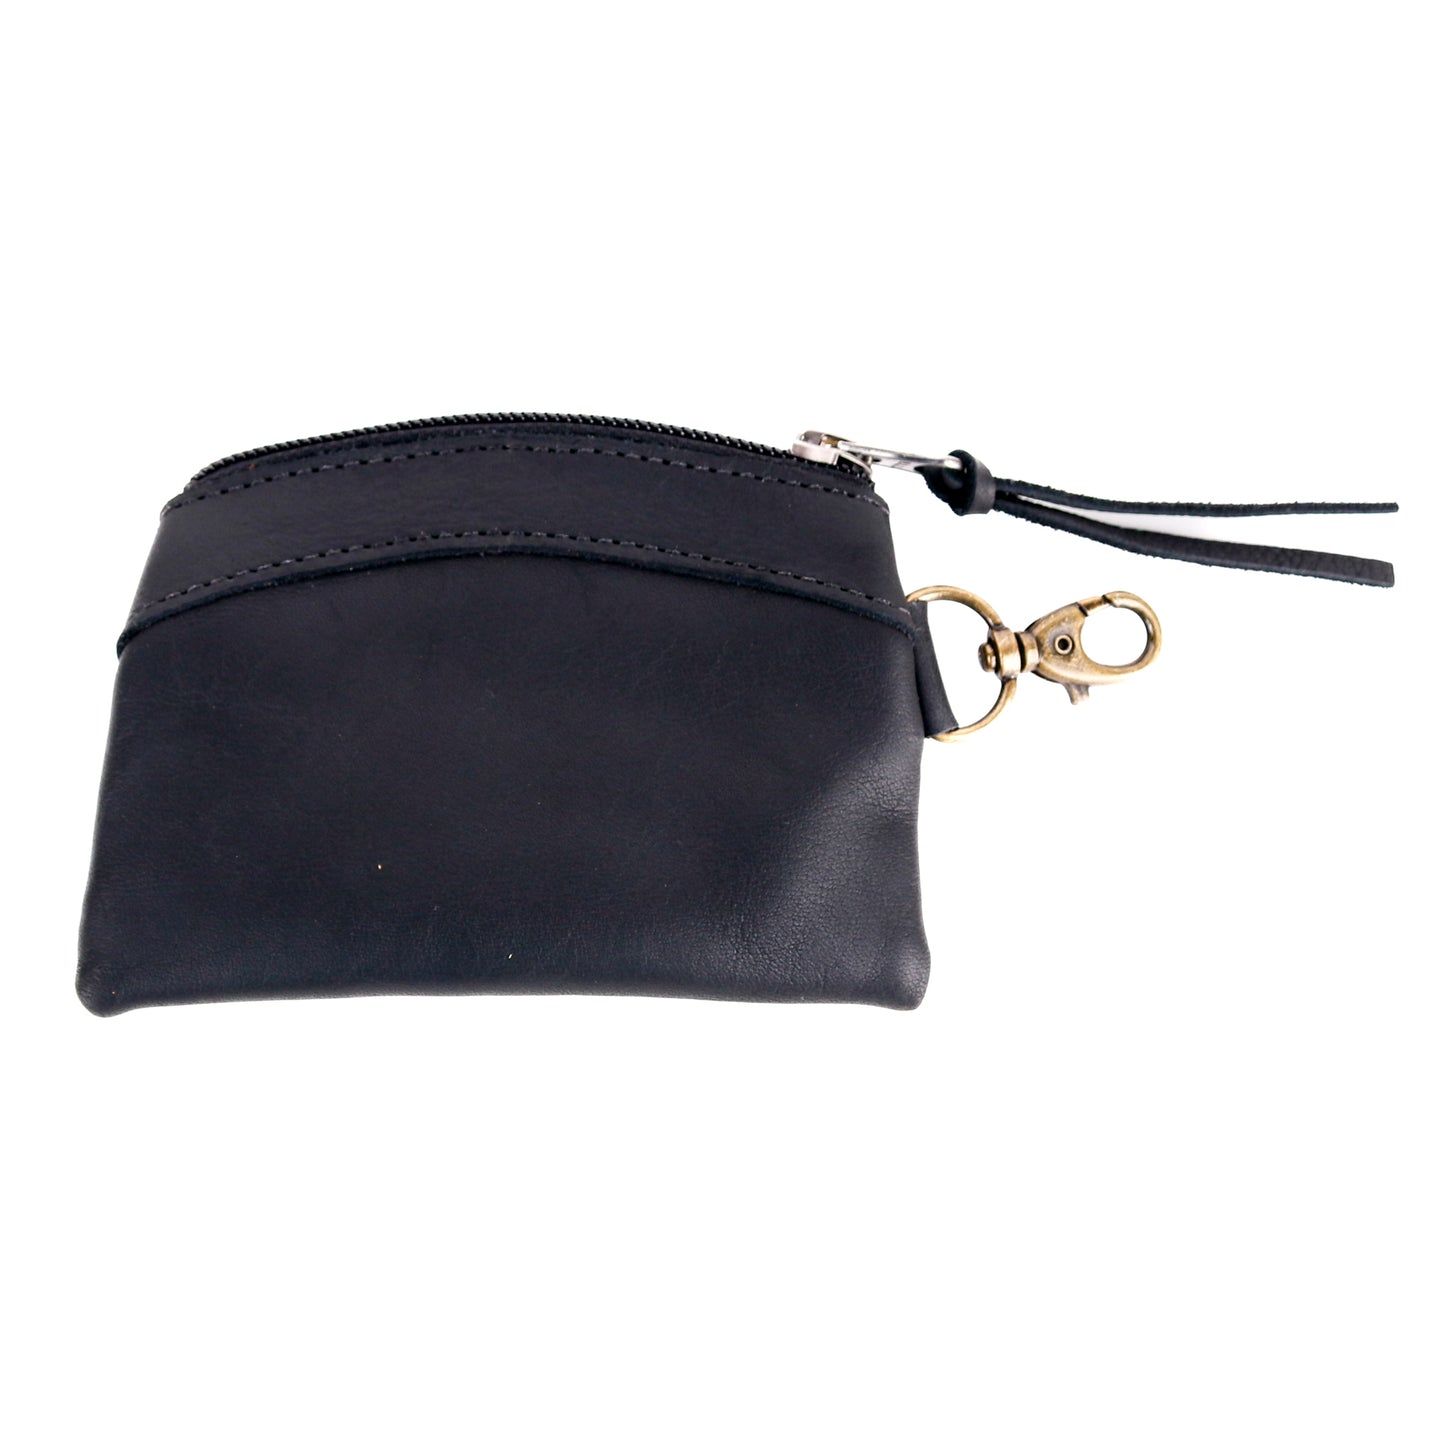 COIN PURSE WITH NEW MOON ICON - FULL LEATHER - BLACK